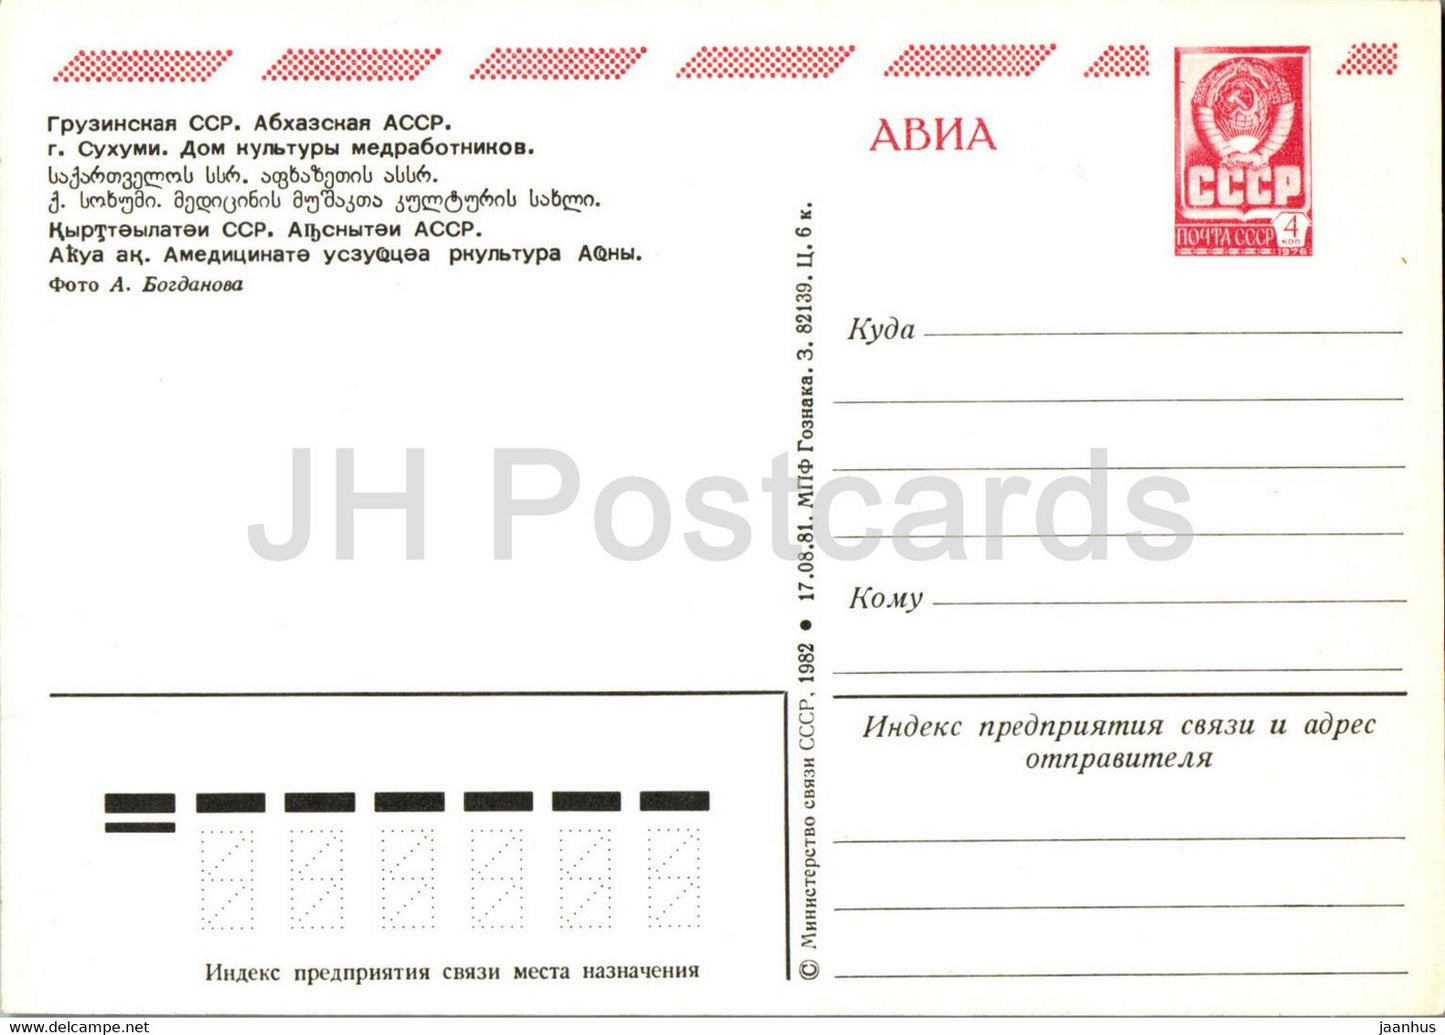 Sukhumi - Sokhumi - house of culture for health workers - Abkhazia - postal stationery - 1982 - Georgia USSR - unused